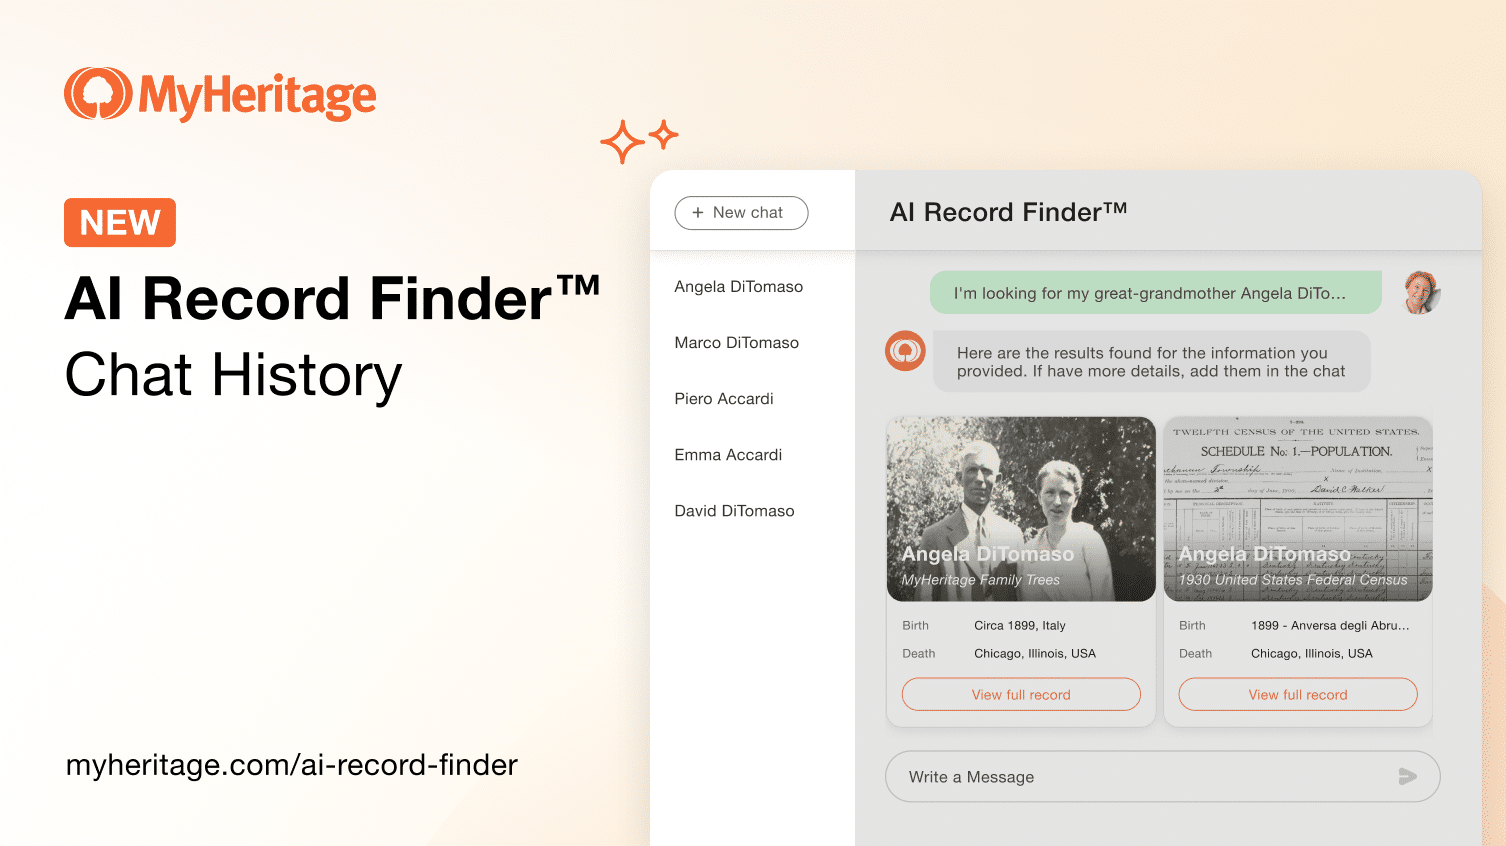 New: AI Record Finder™ Chat History